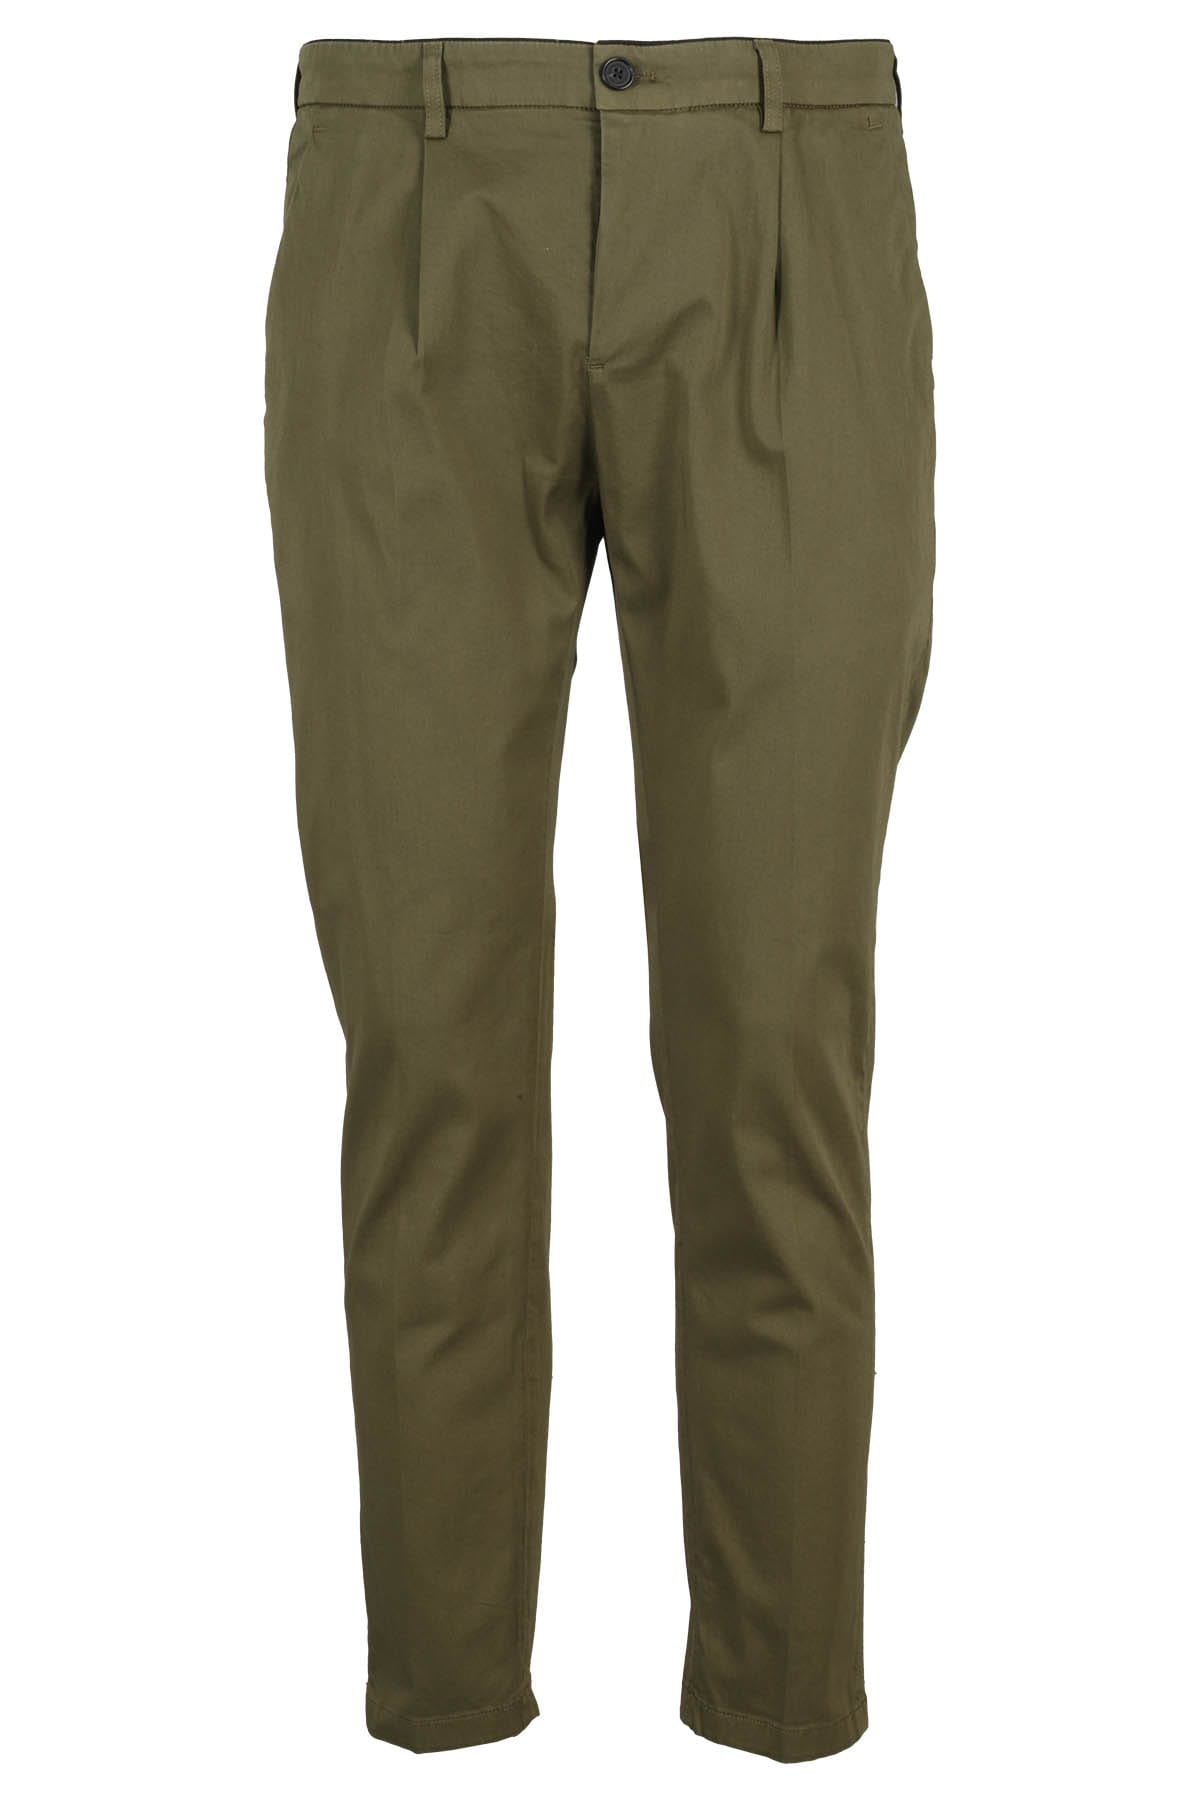 Department Five Prince Pences Chinos In Militare